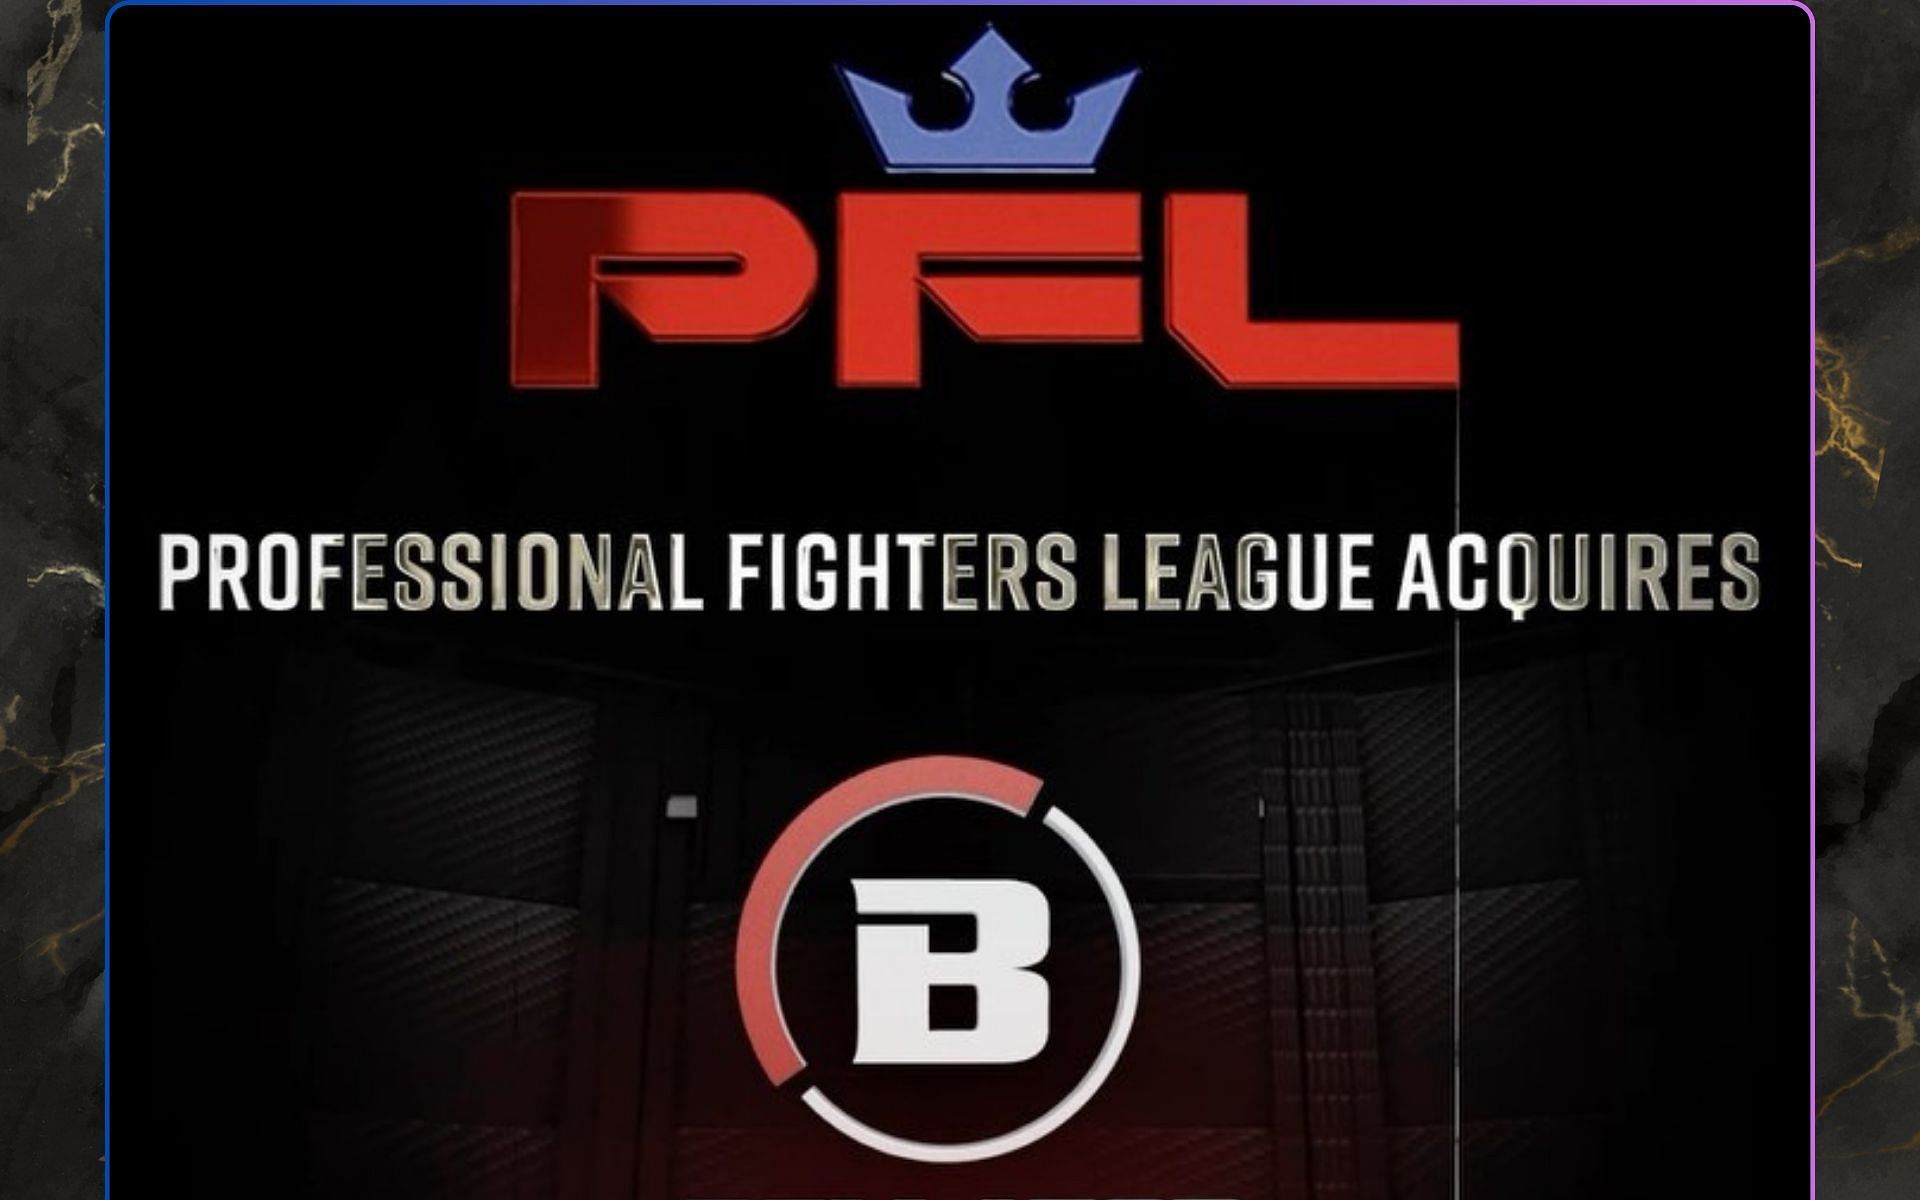 A day after Bellator acquisition, PFL announces partnership with global ...